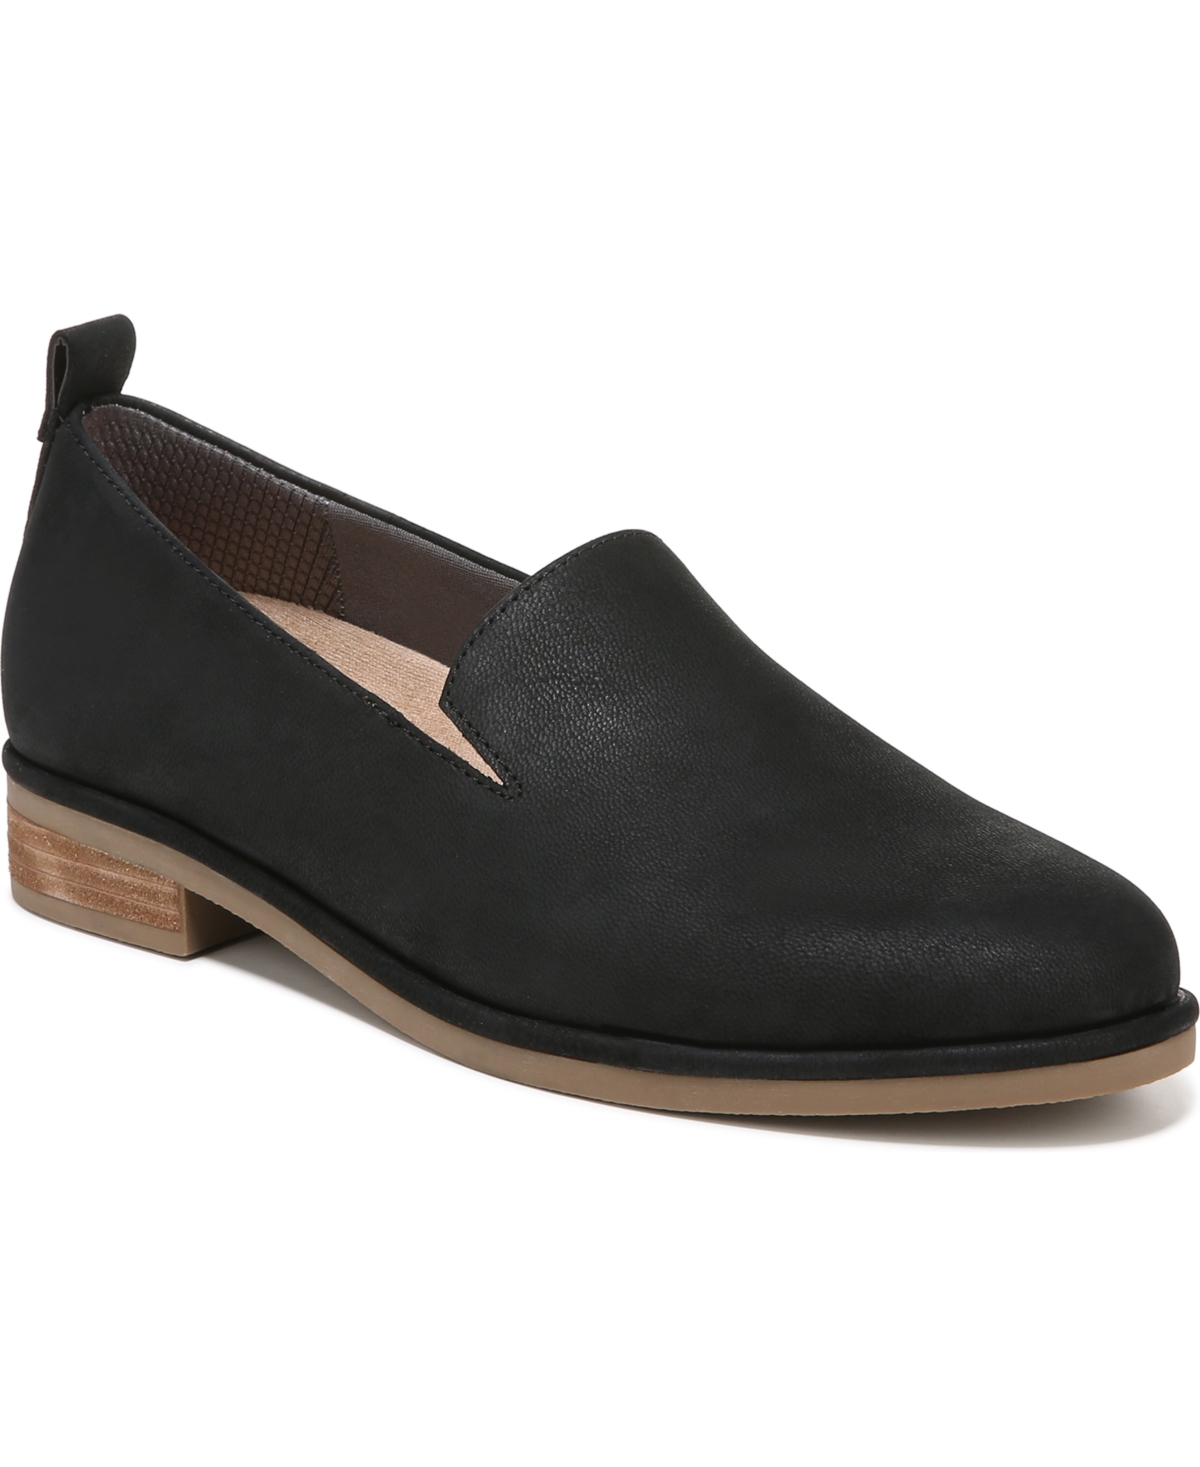 Dr. Scholl's Original Collection Women's Avenue Lux Loafers In Black Leather